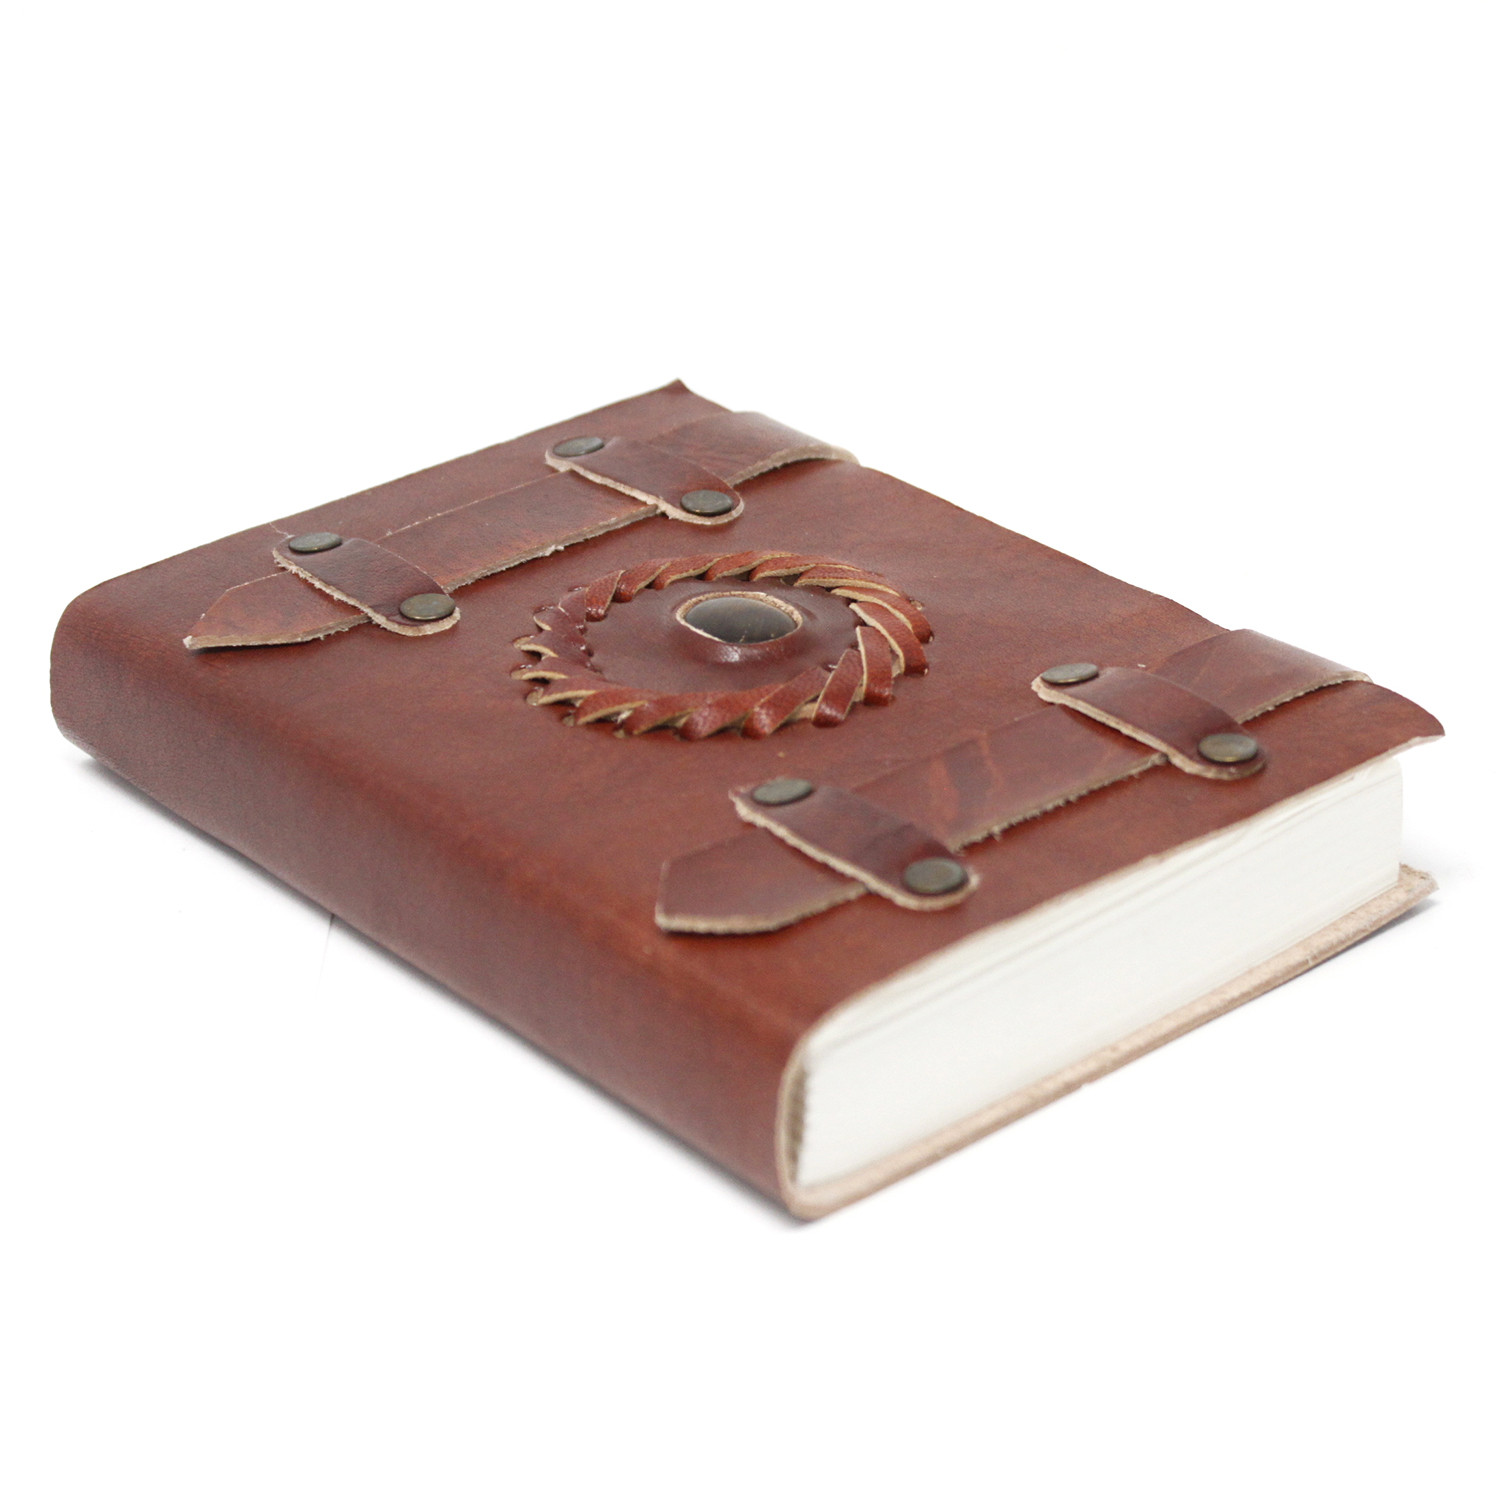 Leather Tigereye with Belts Notebook (6x4